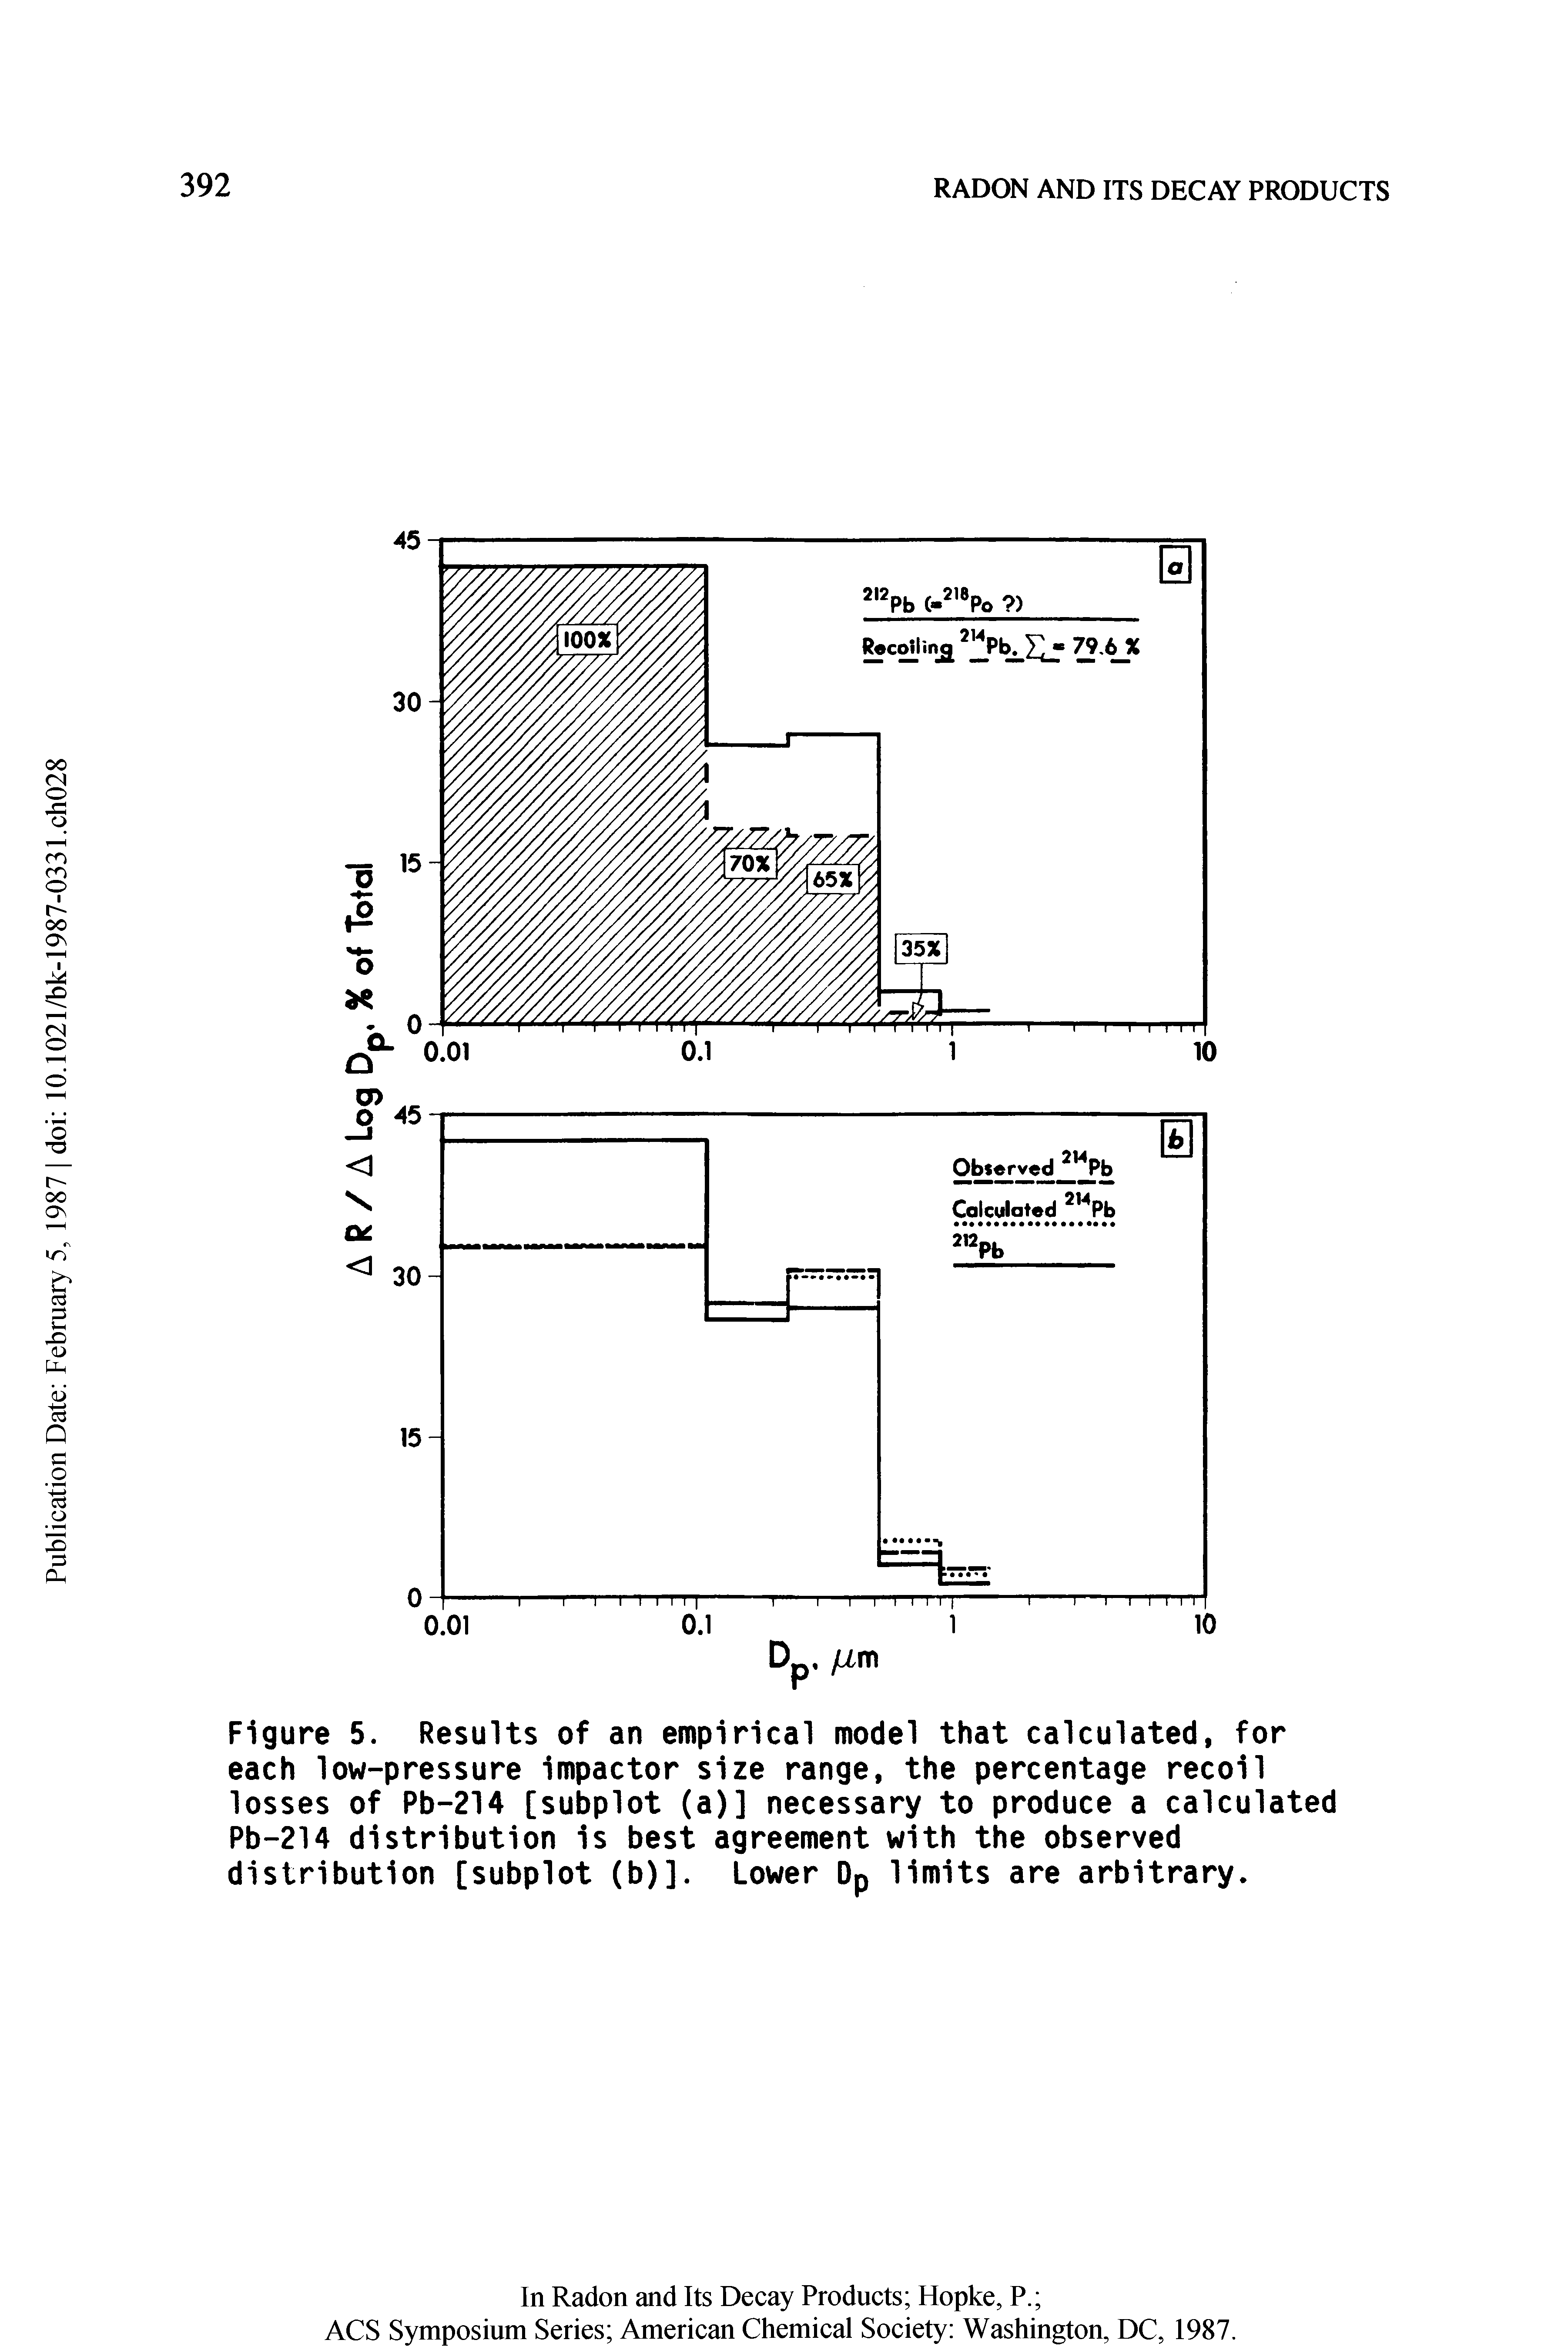 Figure 5. Results of an empirical model that calculated, for each low-pressure impactor size range, the percentage recoil losses of Pb-214 [subplot (a)] necessary to produce a calculated Pb-214 distribution is best agreement with the observed distribution [subplot (b)]. Lower Dp limits are arbitrary.